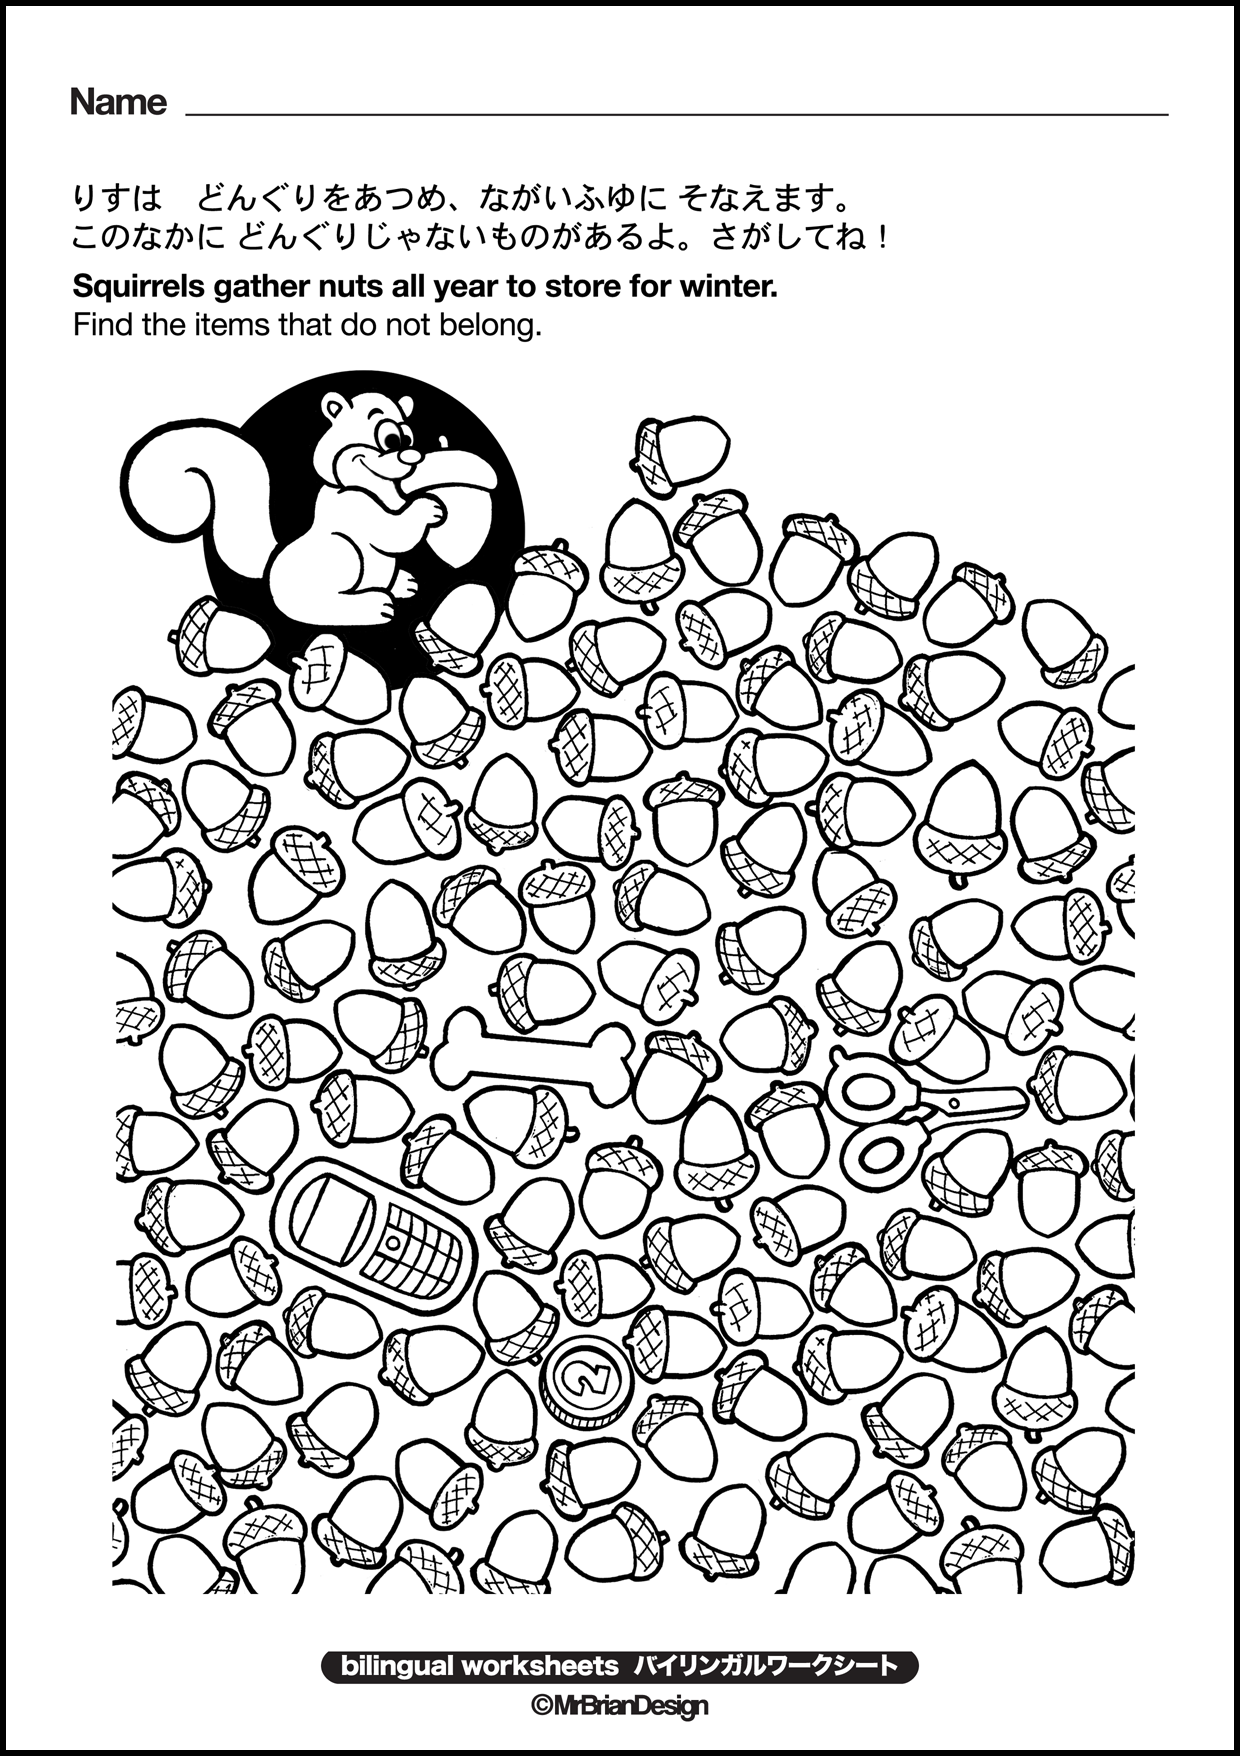 6 Best Images of Geometry Logic Worksheets - Hard Abstract Coloring Pages, Coloring Puzzles ...